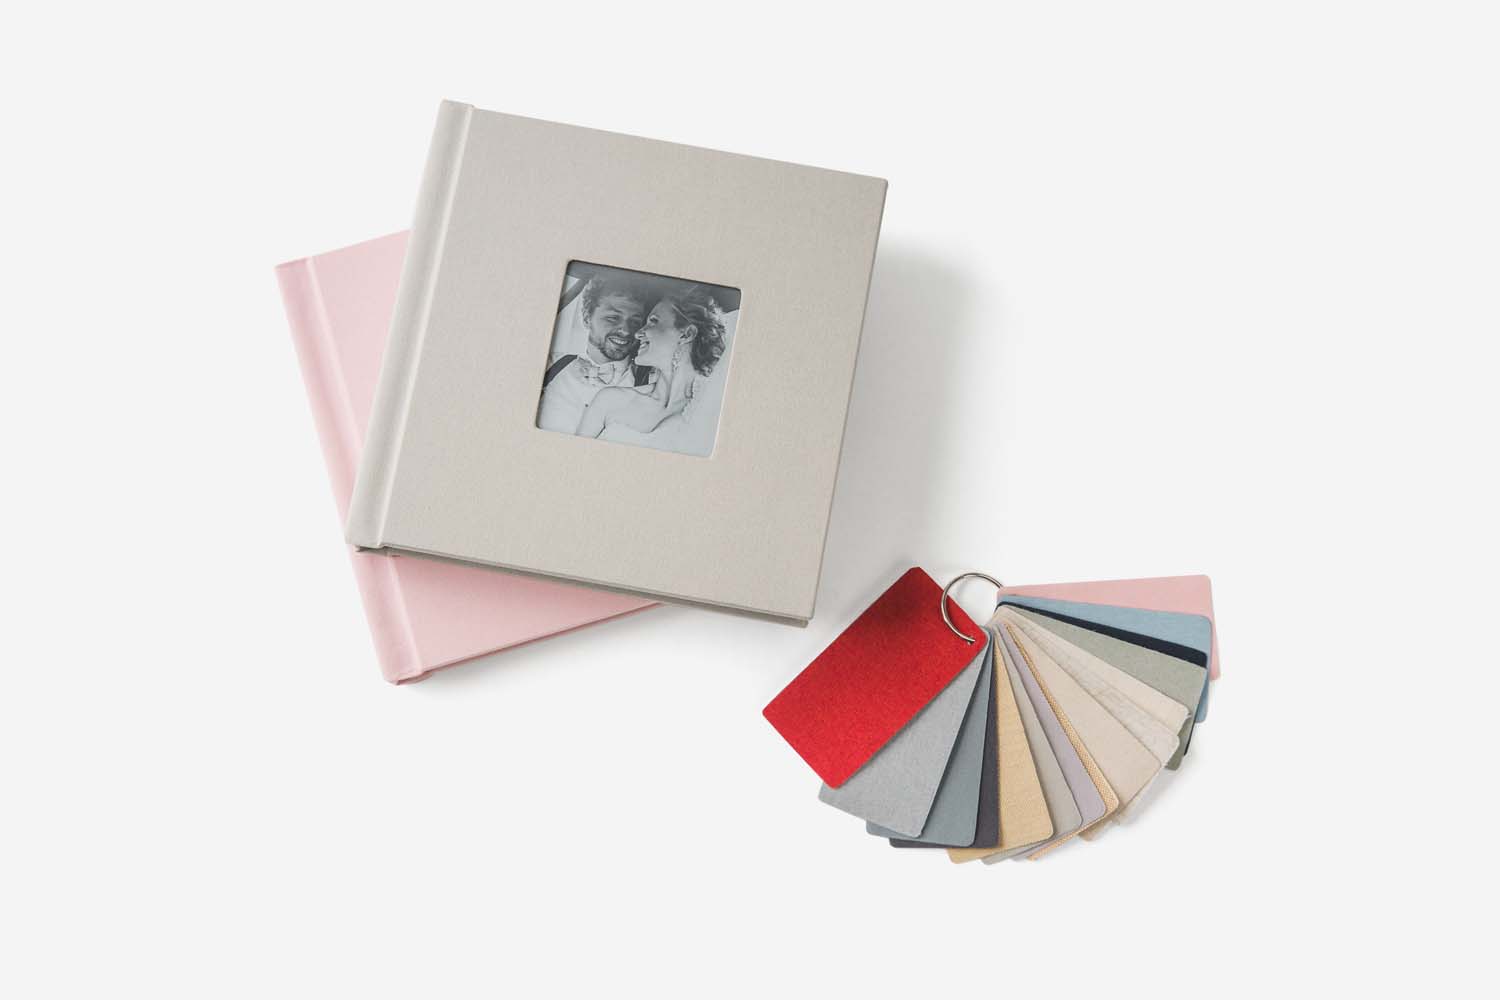 Two Albums Remembered linen wedding albums with a photo inset into the cover shown with a ring of swatches for color options